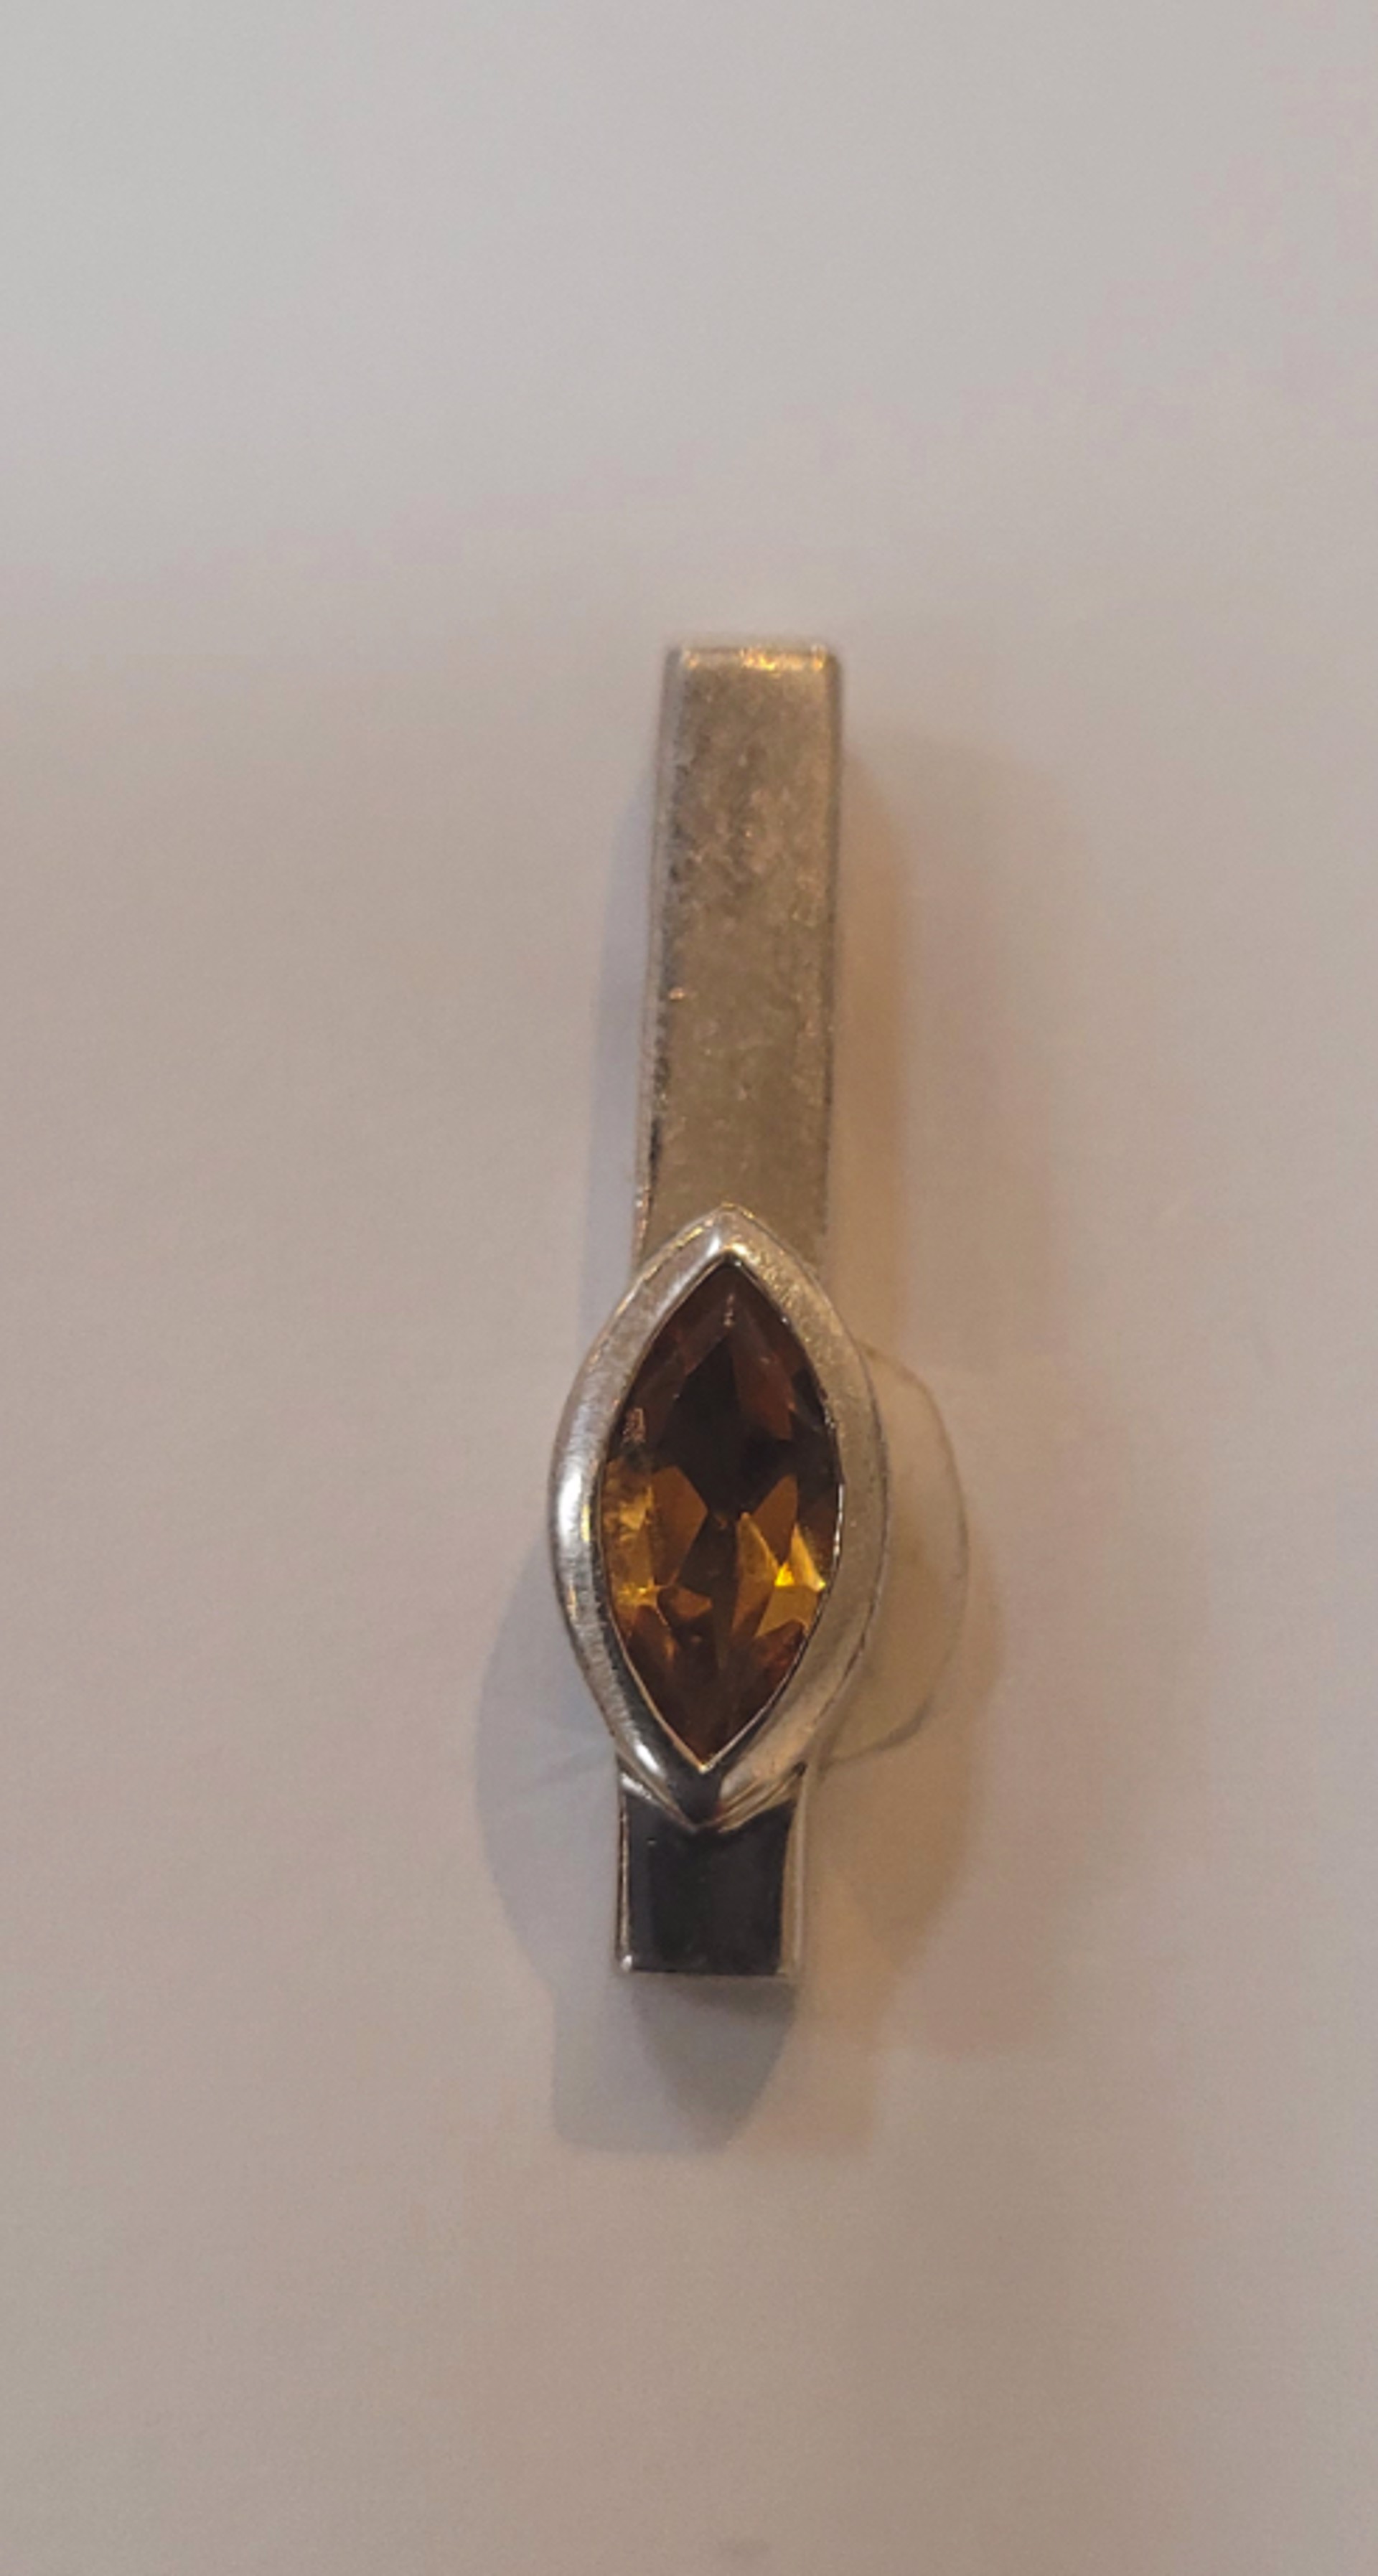 Pendant - Marquis Cut Citrine Stone in Sterling Silver Totem by Joryel Vera